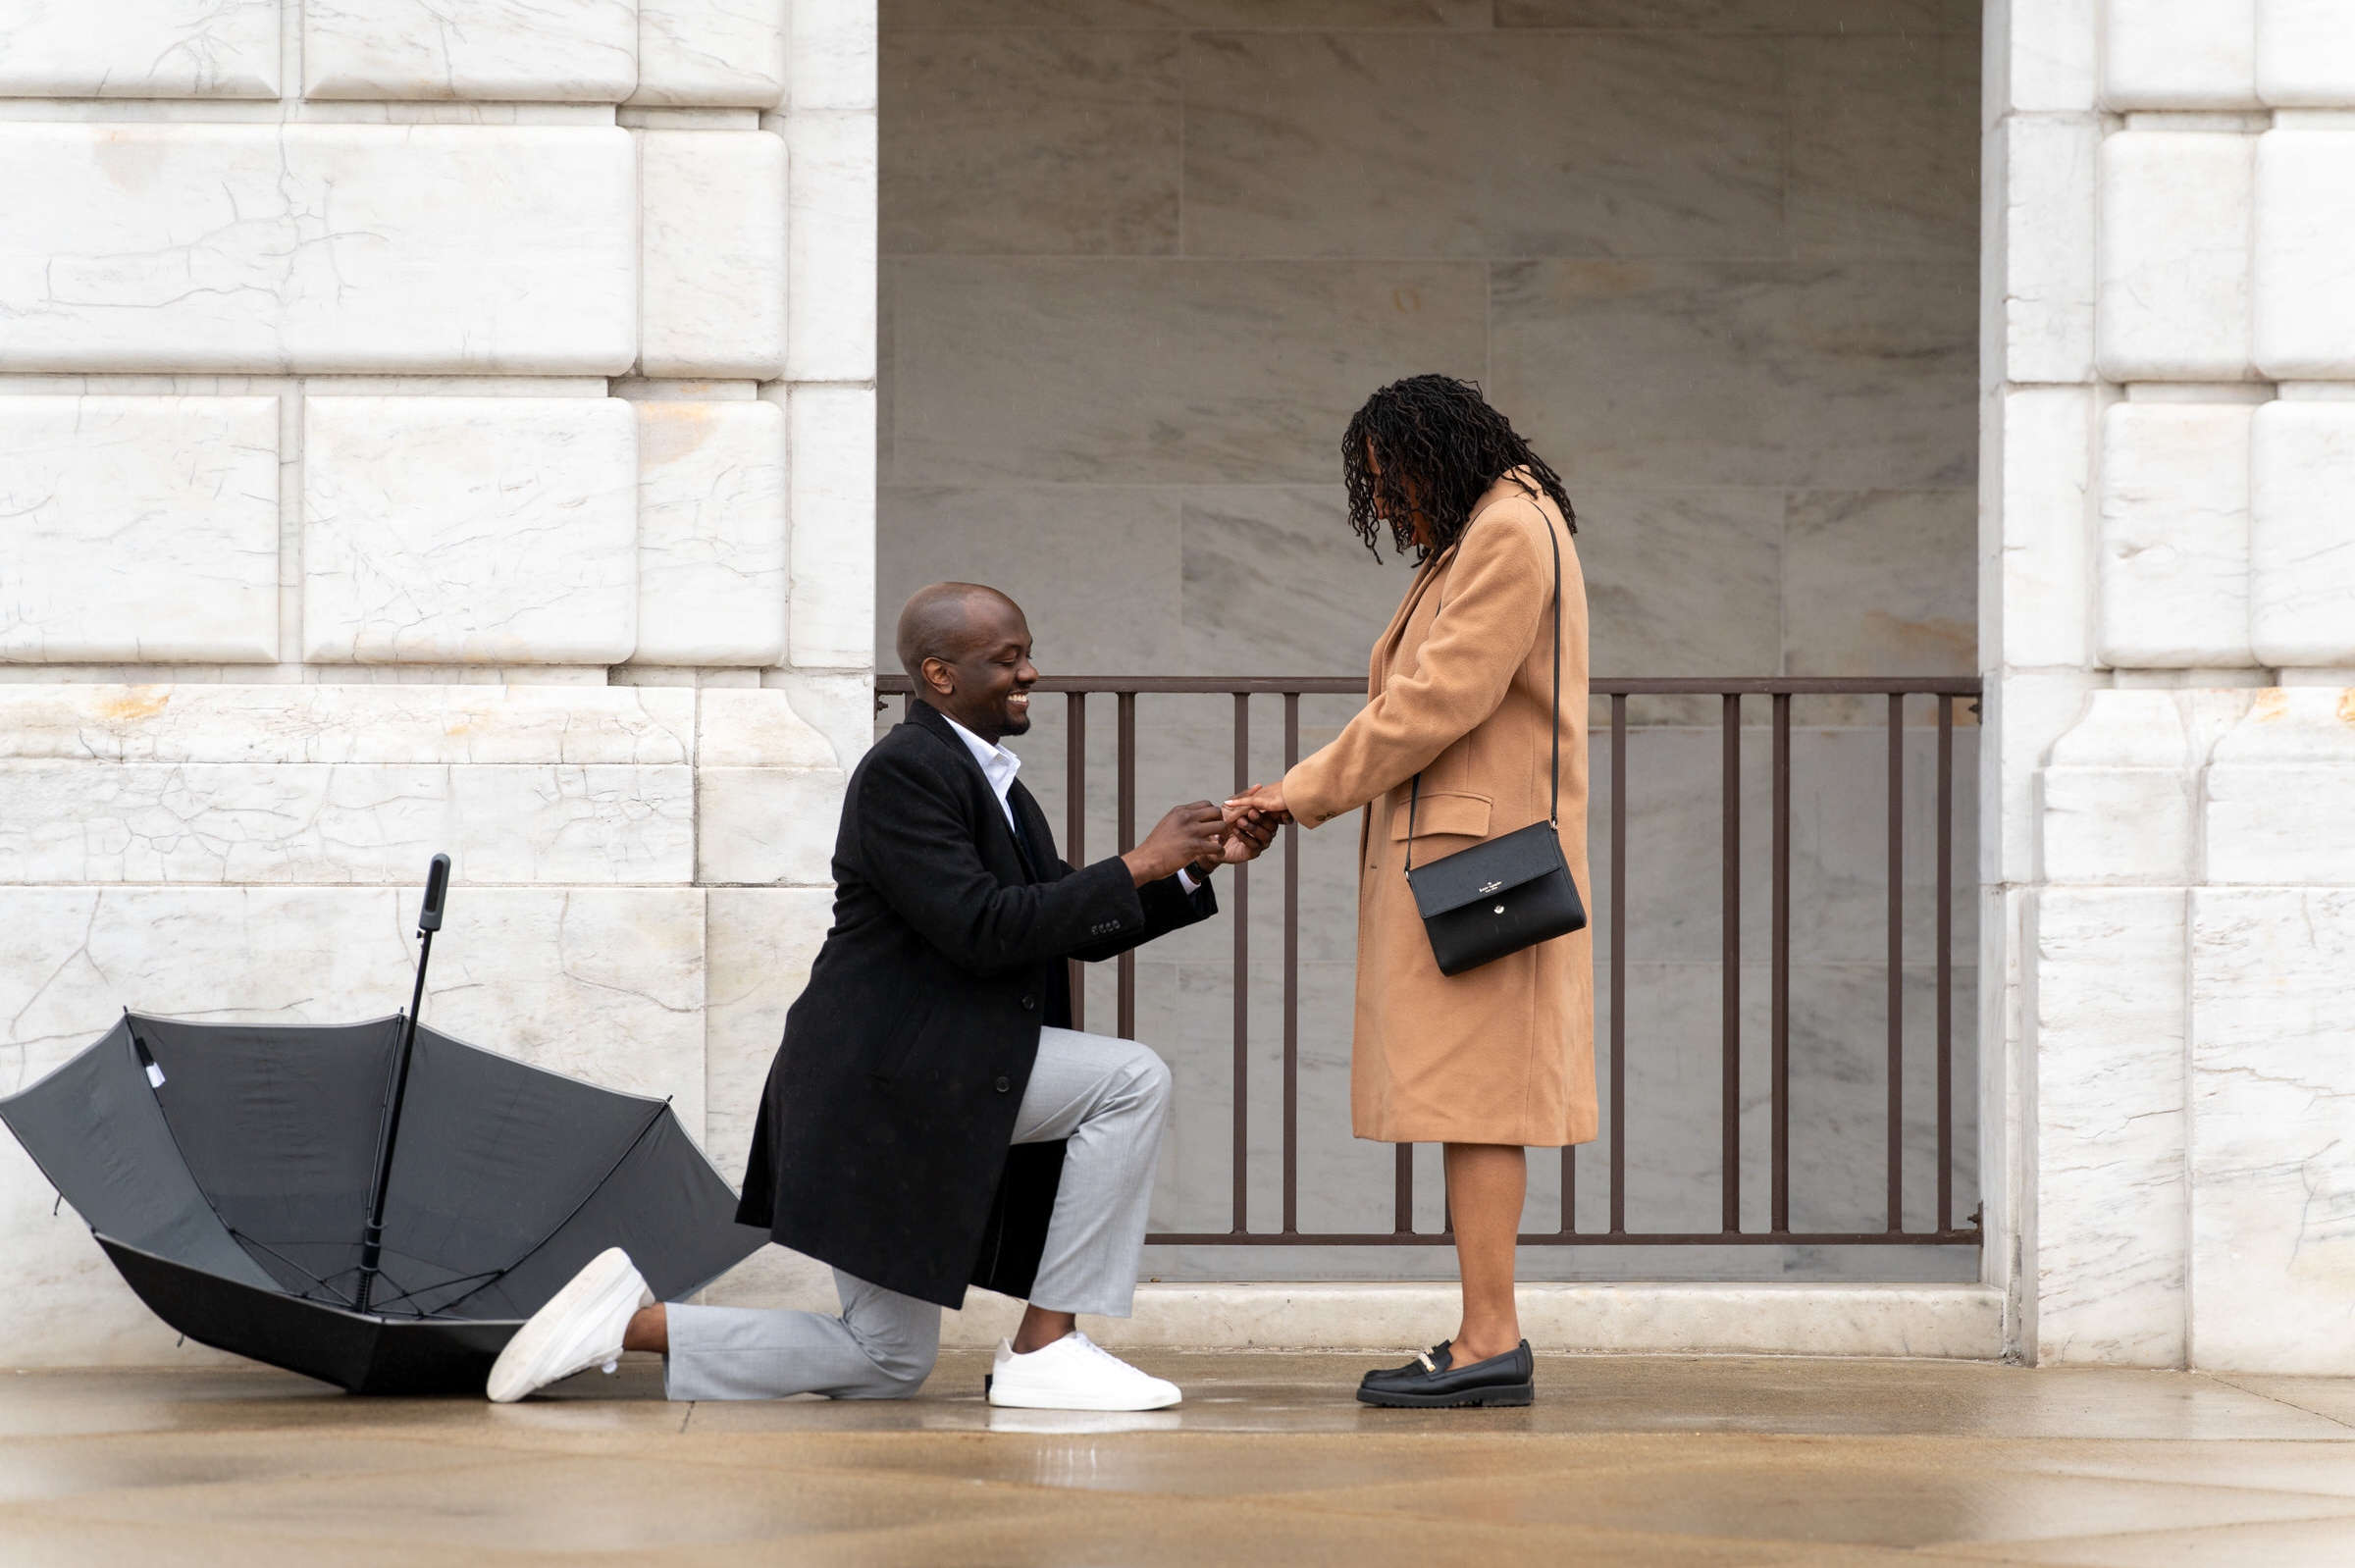 A gentleman takes a knee and places an engagement ring on his fiance's finger during a marriage proposal at the DIA in the rain.  